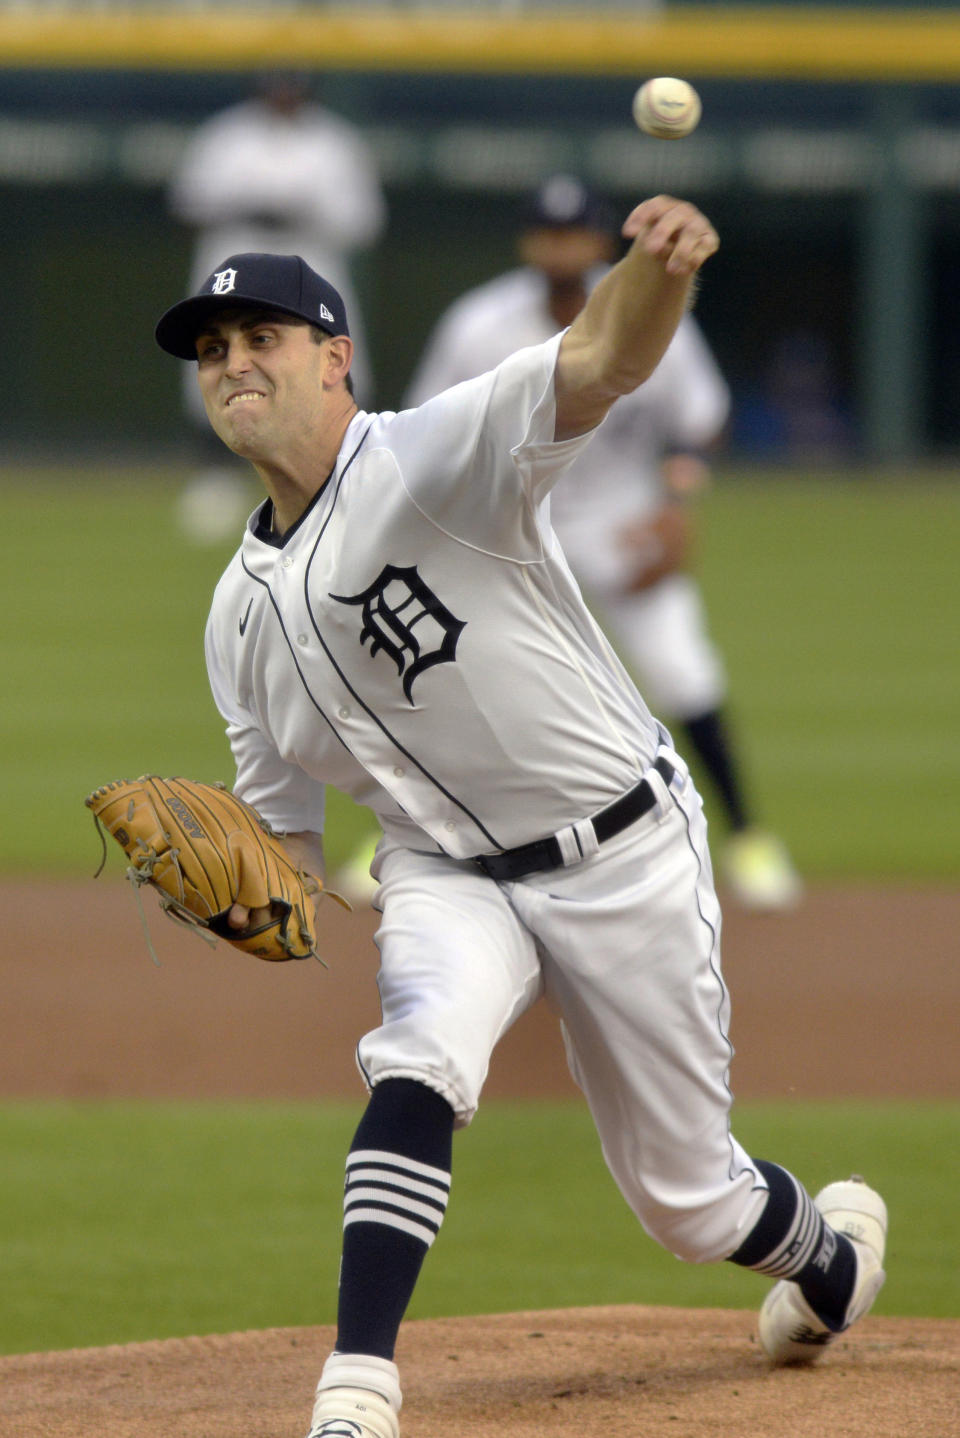 Detroit Tigers starting pitcher Matthew Boyd throws to a Kansas City Royals batter during the first inning of a baseball game Tuesday, Sept. 15, 2020, in Detroit. (AP Photo/Jose Juarez)